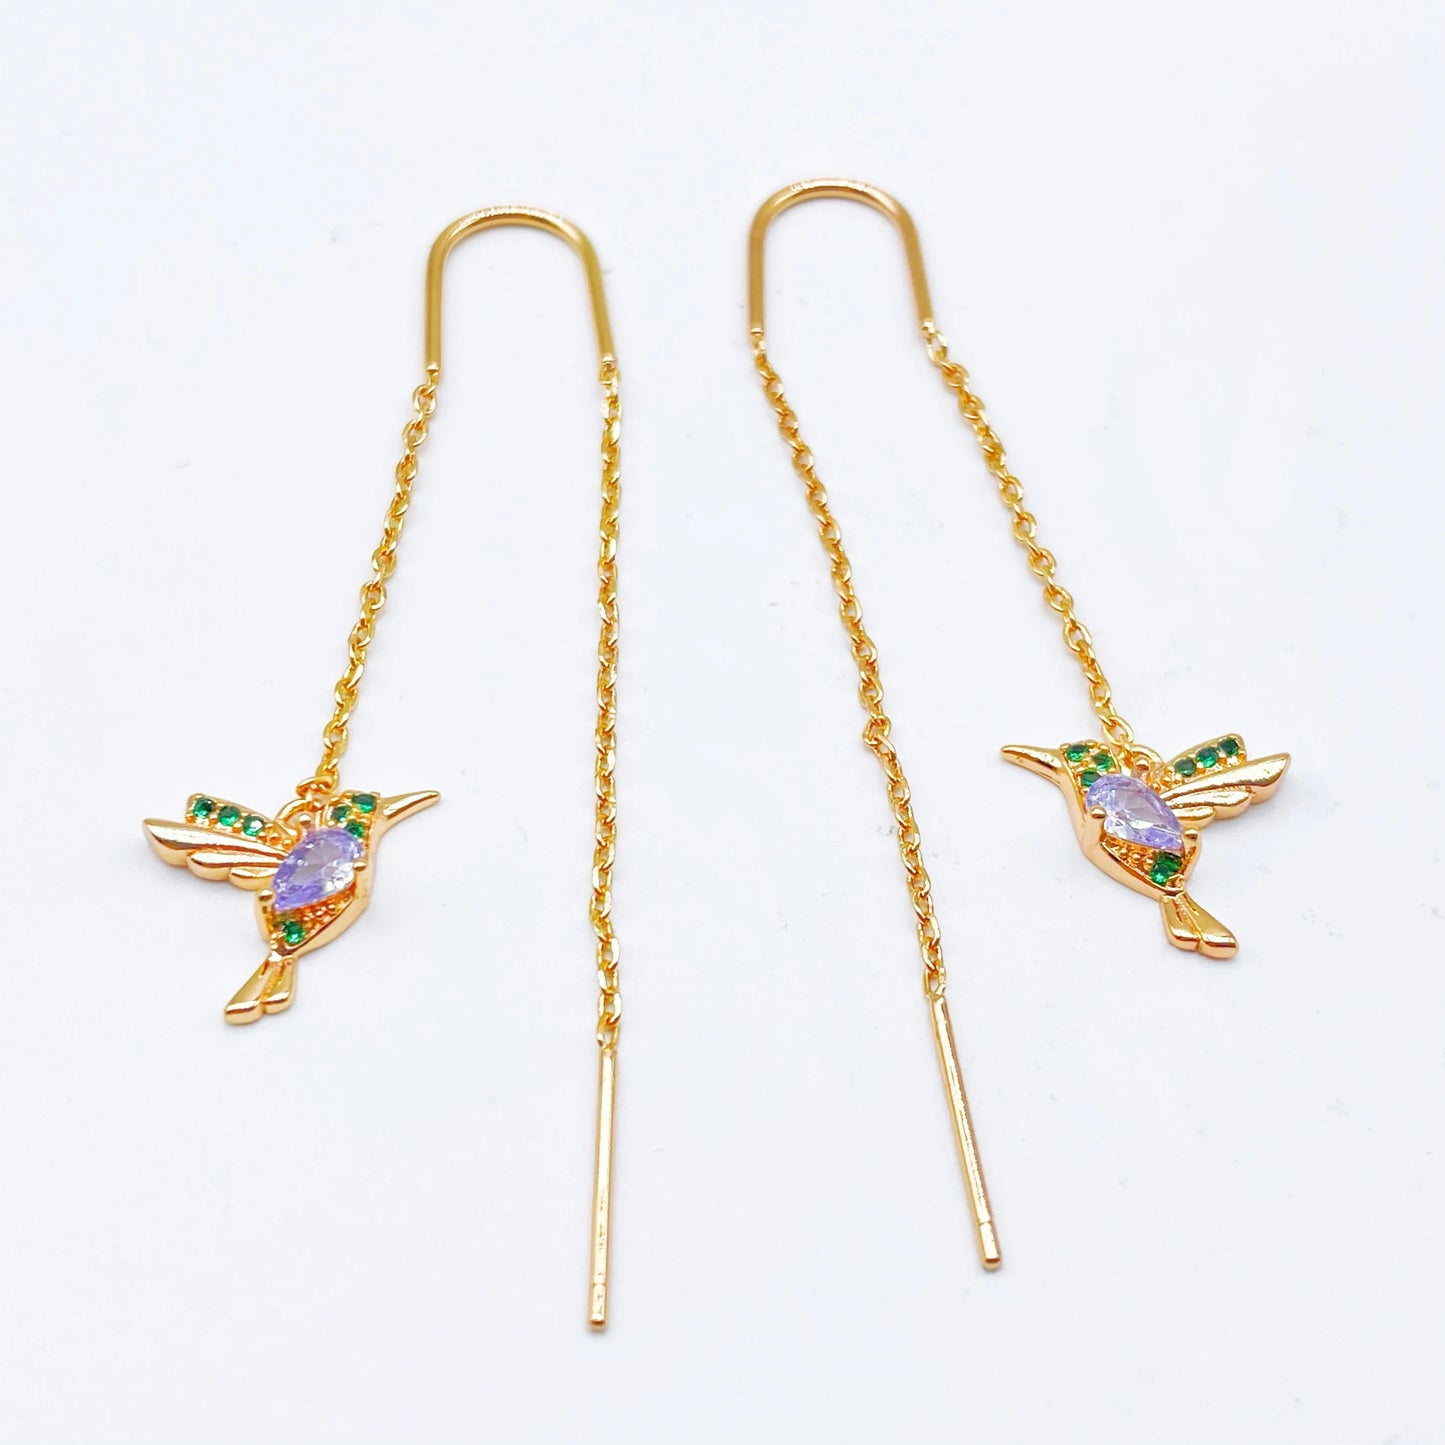 Hot Fashion Cute 585 Rose Gold Long Line Chain Women Various Mini Lovely Bird Tassel Pet Earrings Adjustable Exclusive Jewelry